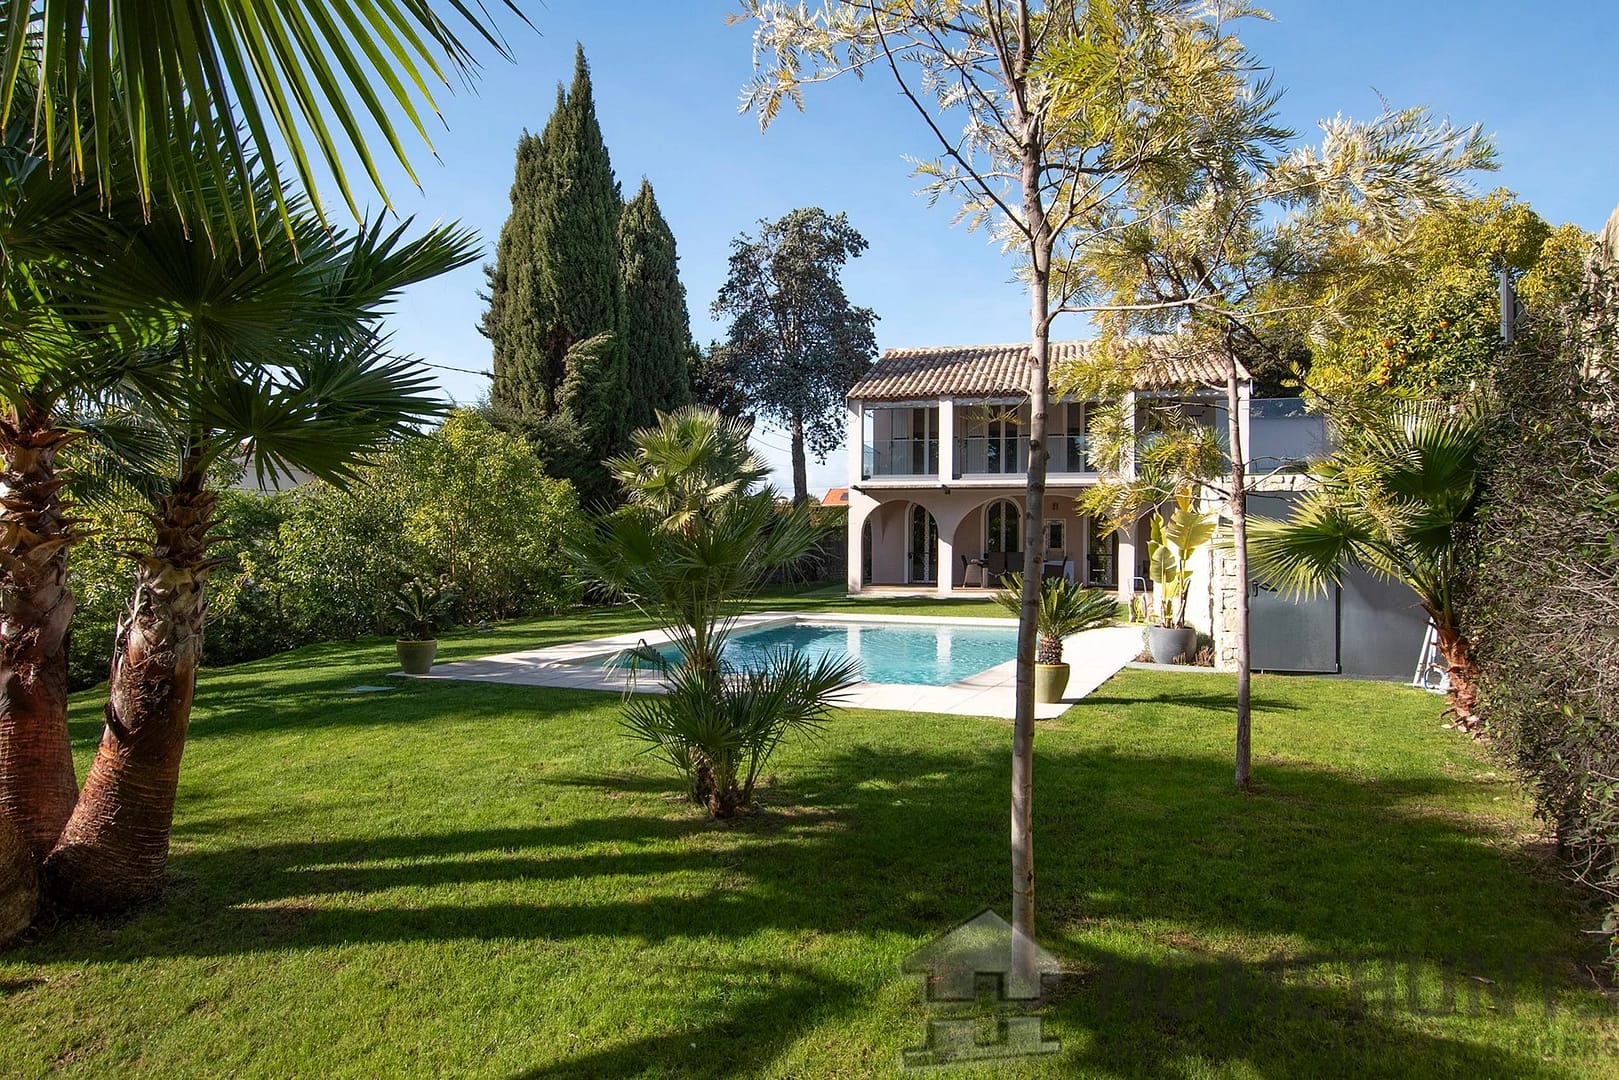 4 Bedroom Villa/House in Le Cannet 6